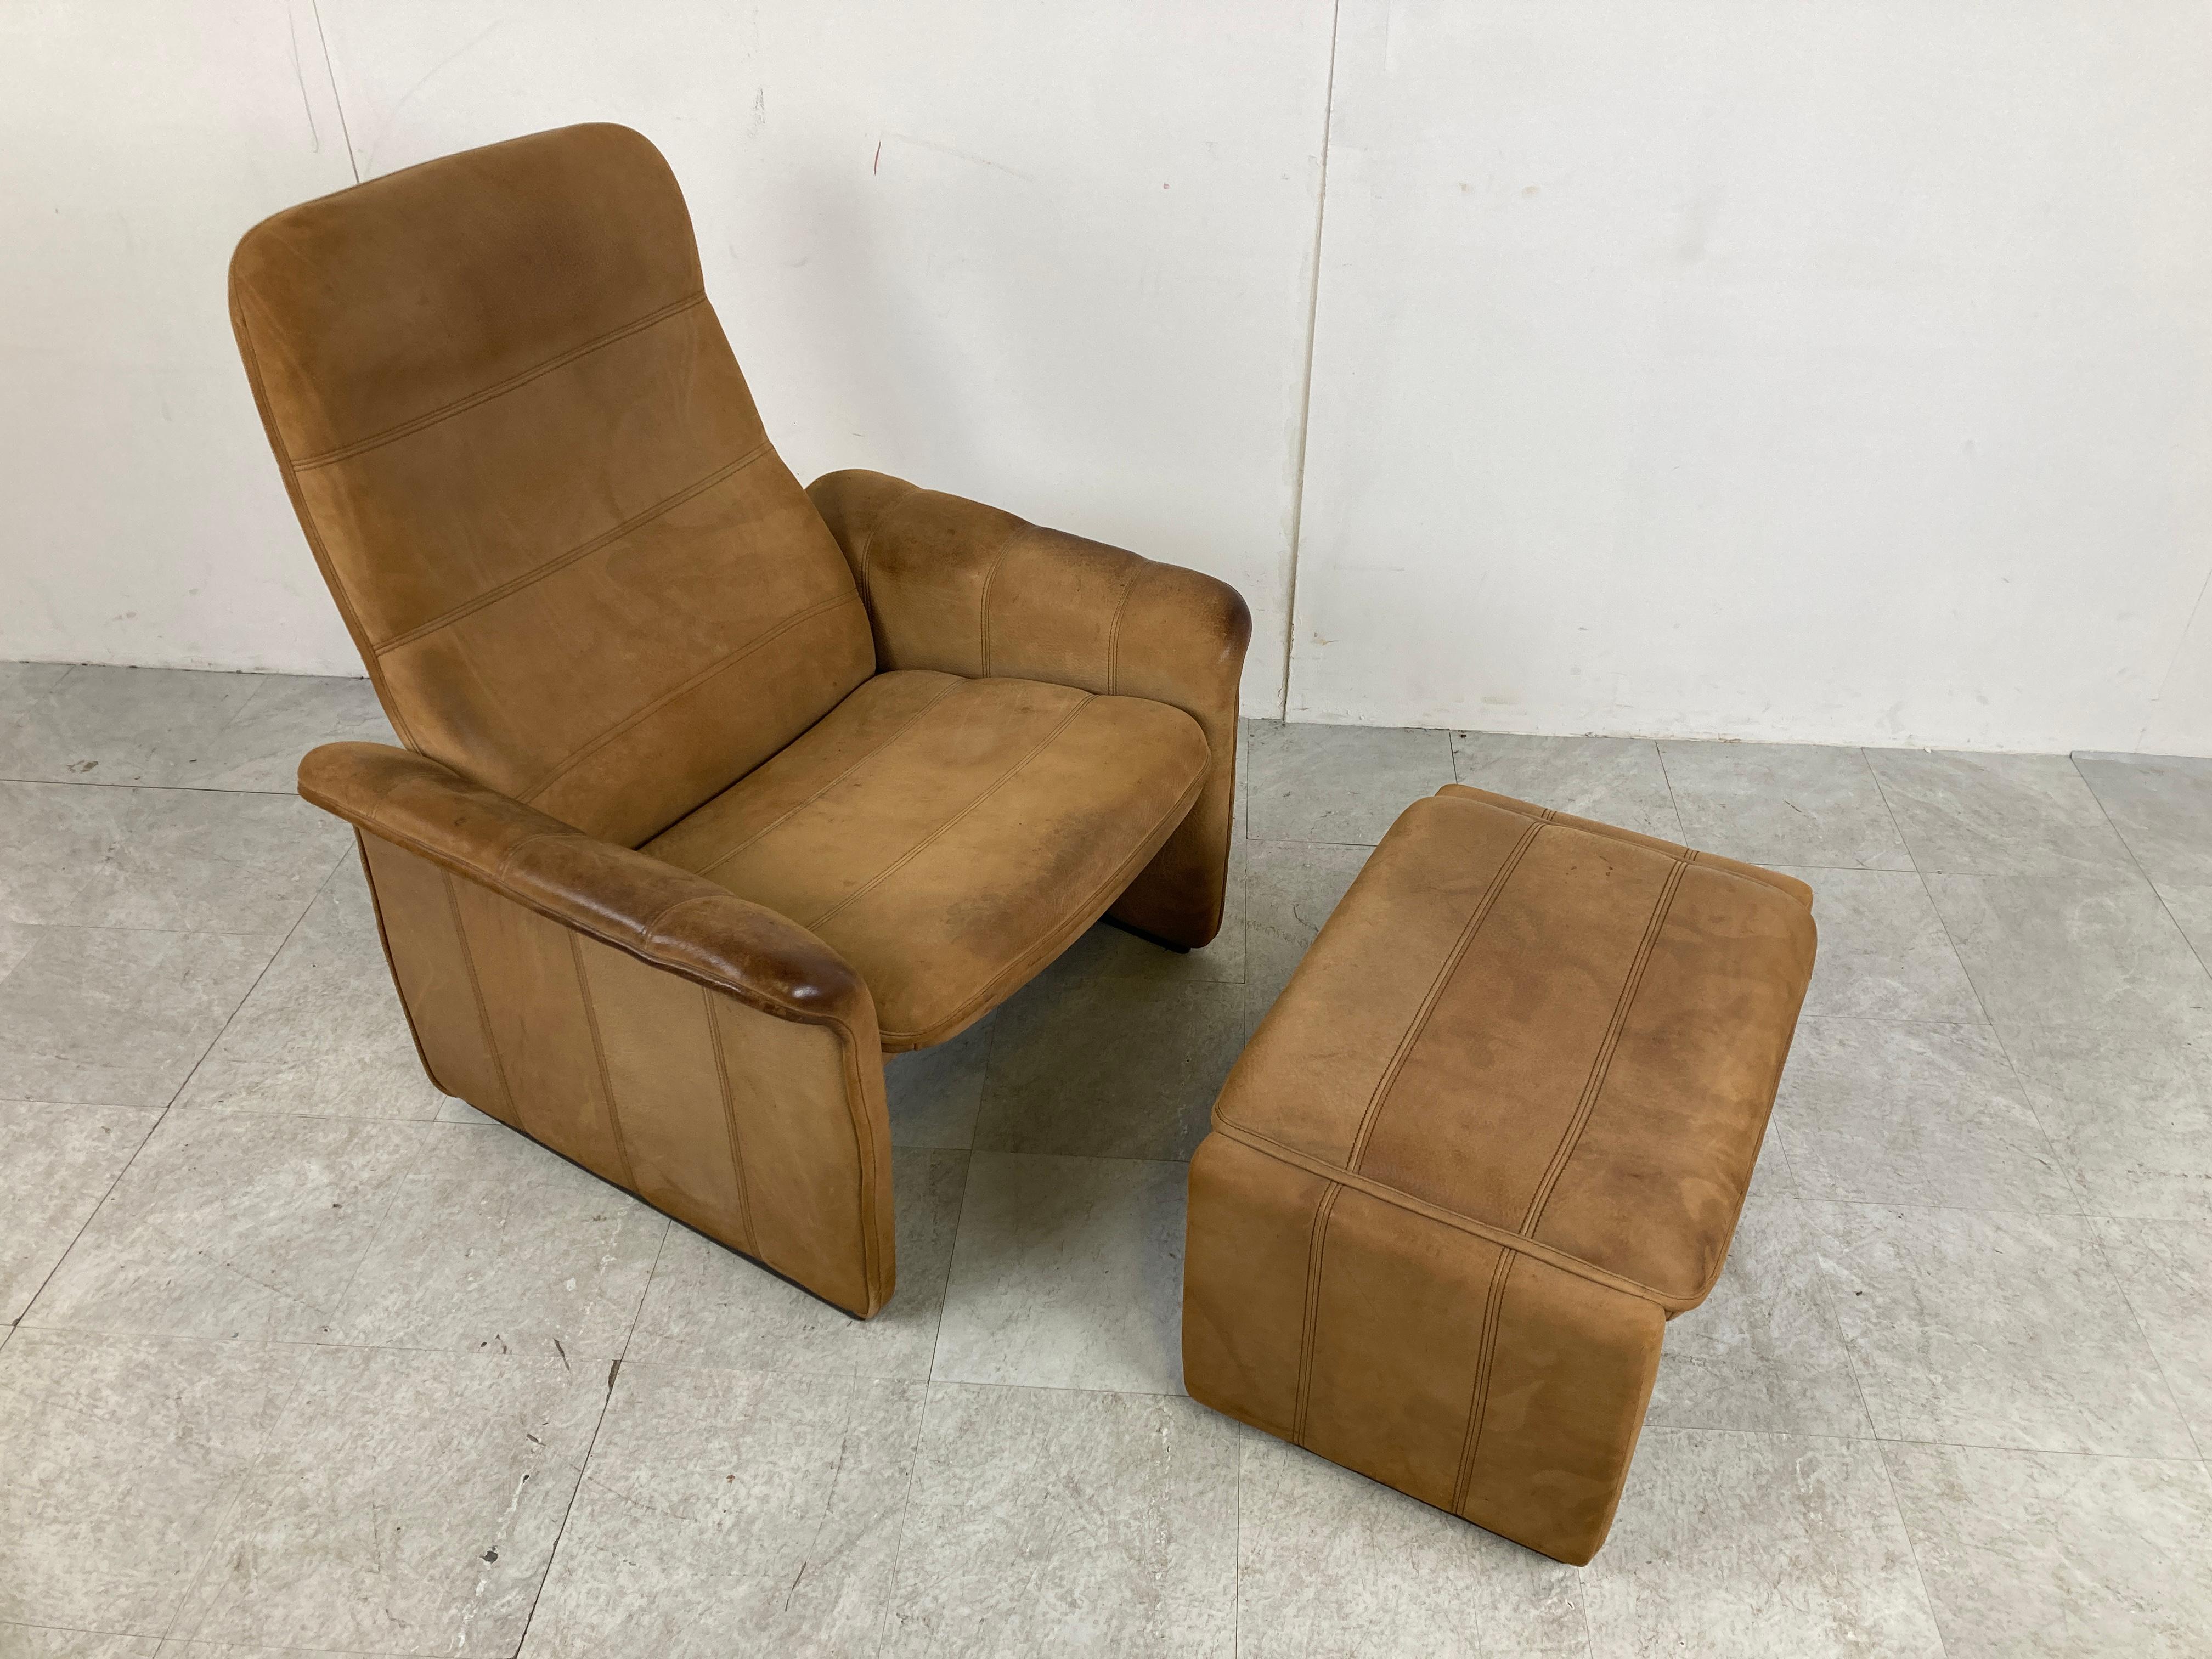 Late 20th Century Vintage Ds 50 Leather Lounge Chair and Ottoman by De Sede, 1970s For Sale